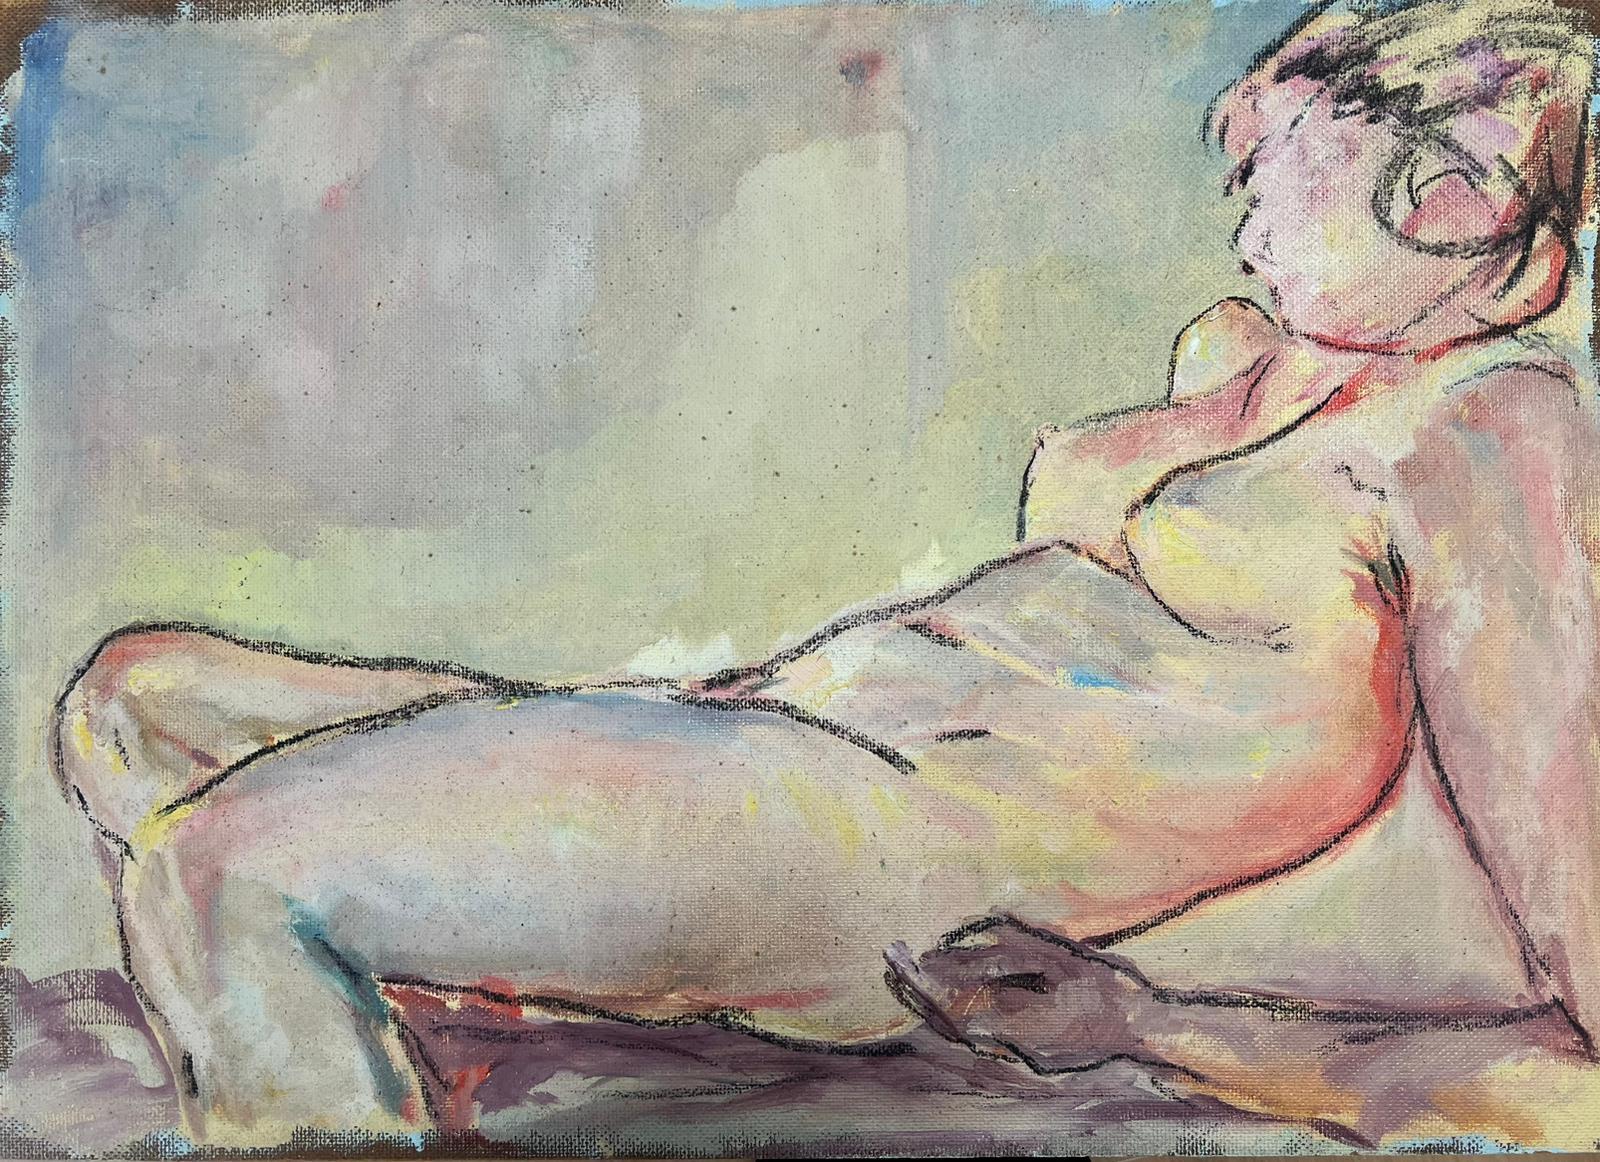 Nude Lady Reclining Model Sketchy 20th century Beige Earthy Tones oil painting - Painting by British 20th century